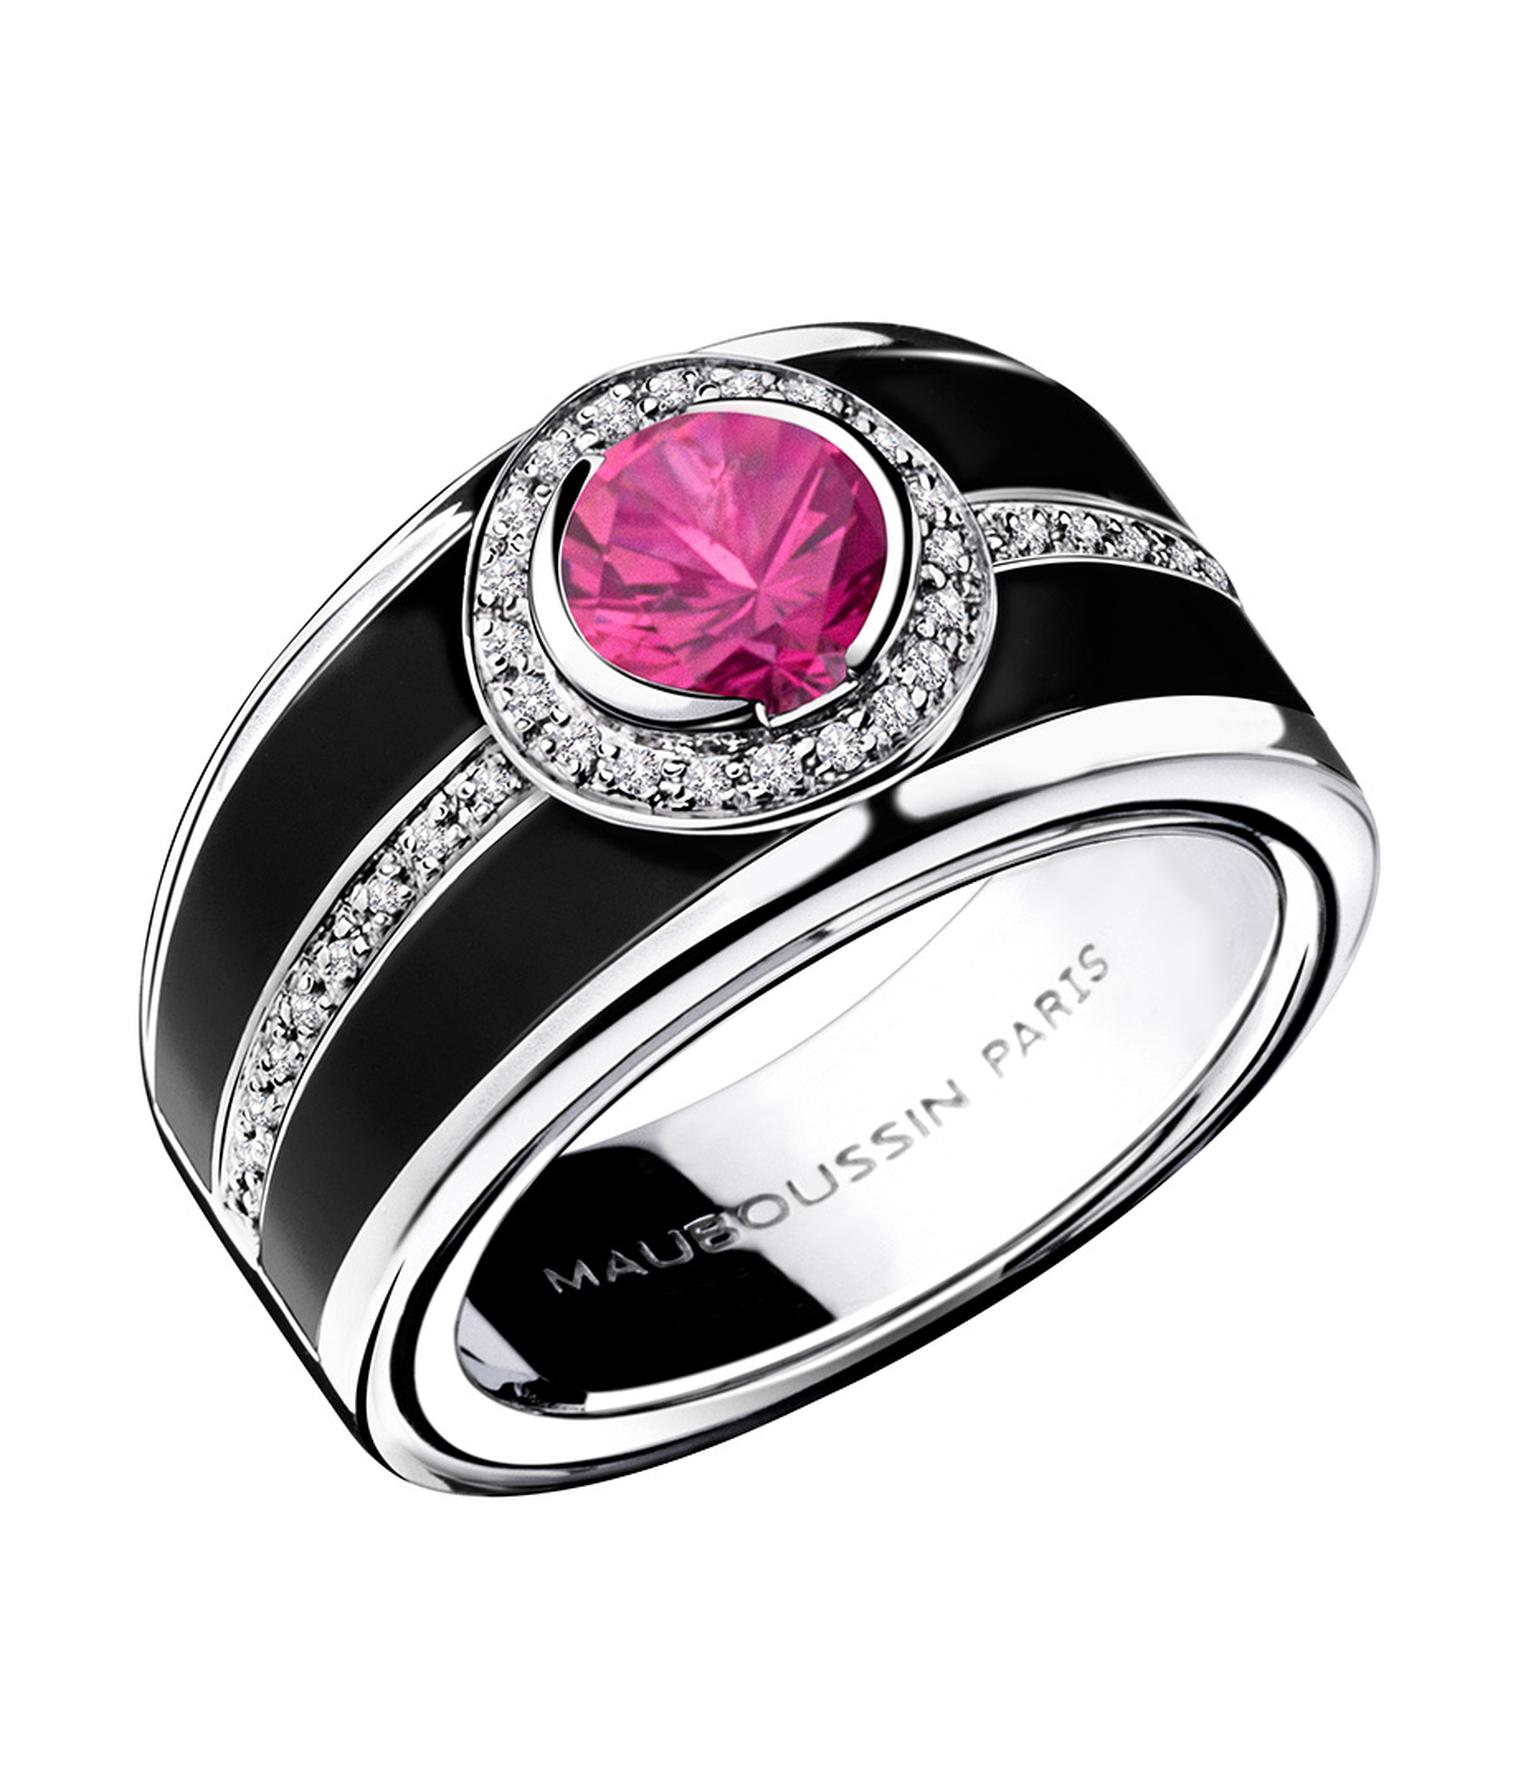 In black lacquer with a 1.03ct pink sapphire surrounded by pavé diamonds, Mauboussin's Bonbon Rose ring is also available with either a blue sapphire or black diamond ($7,850).